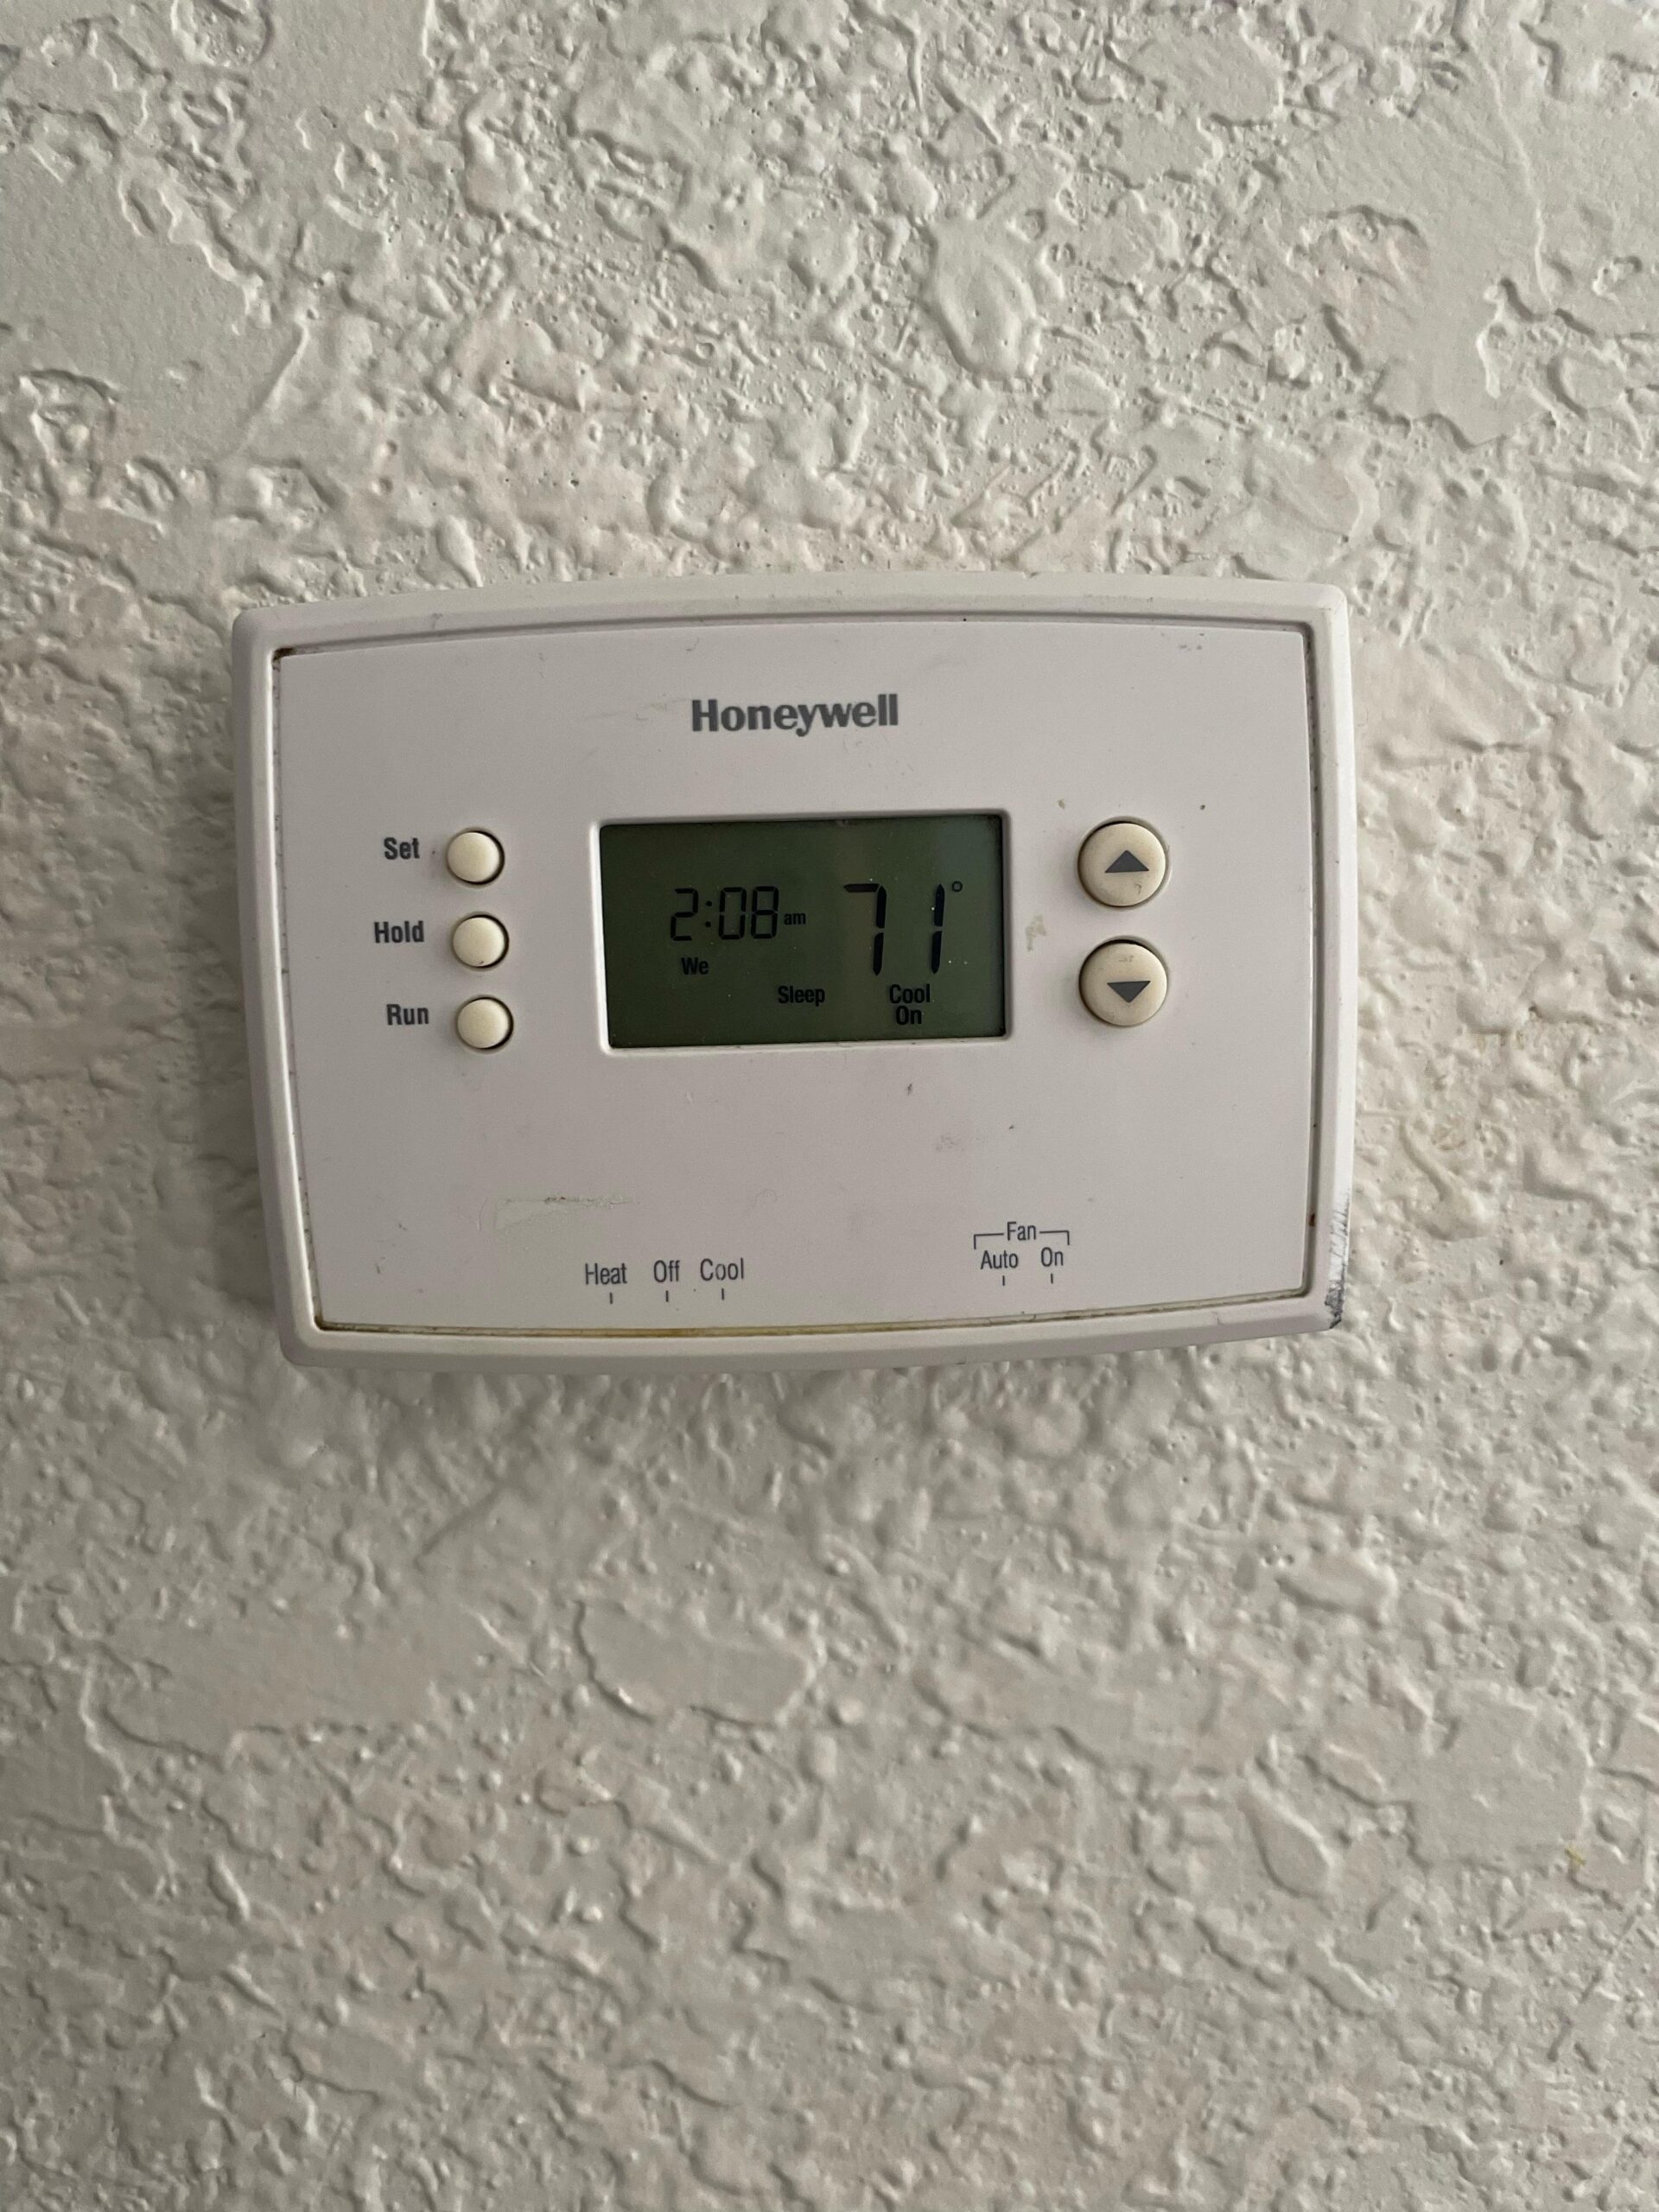 Honeywell Thermostat Keeps Clicking On and Off